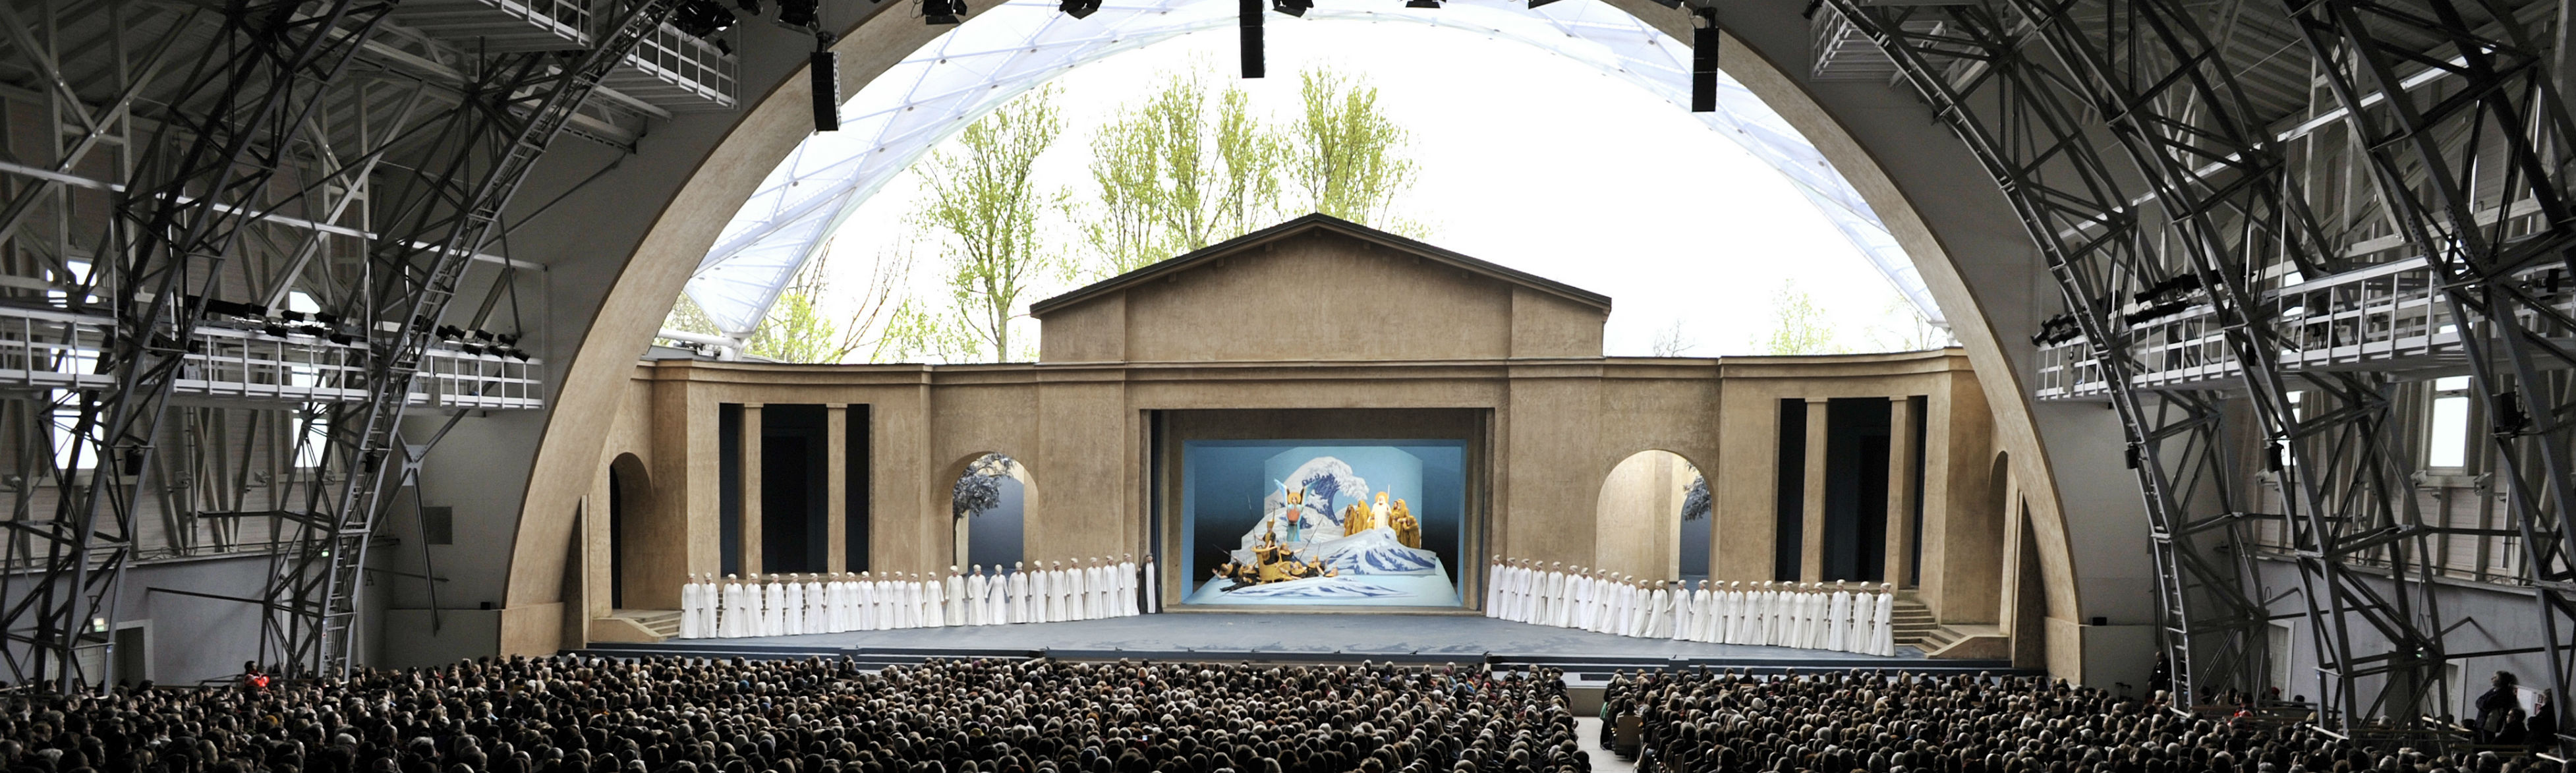 Passion Play Theatre